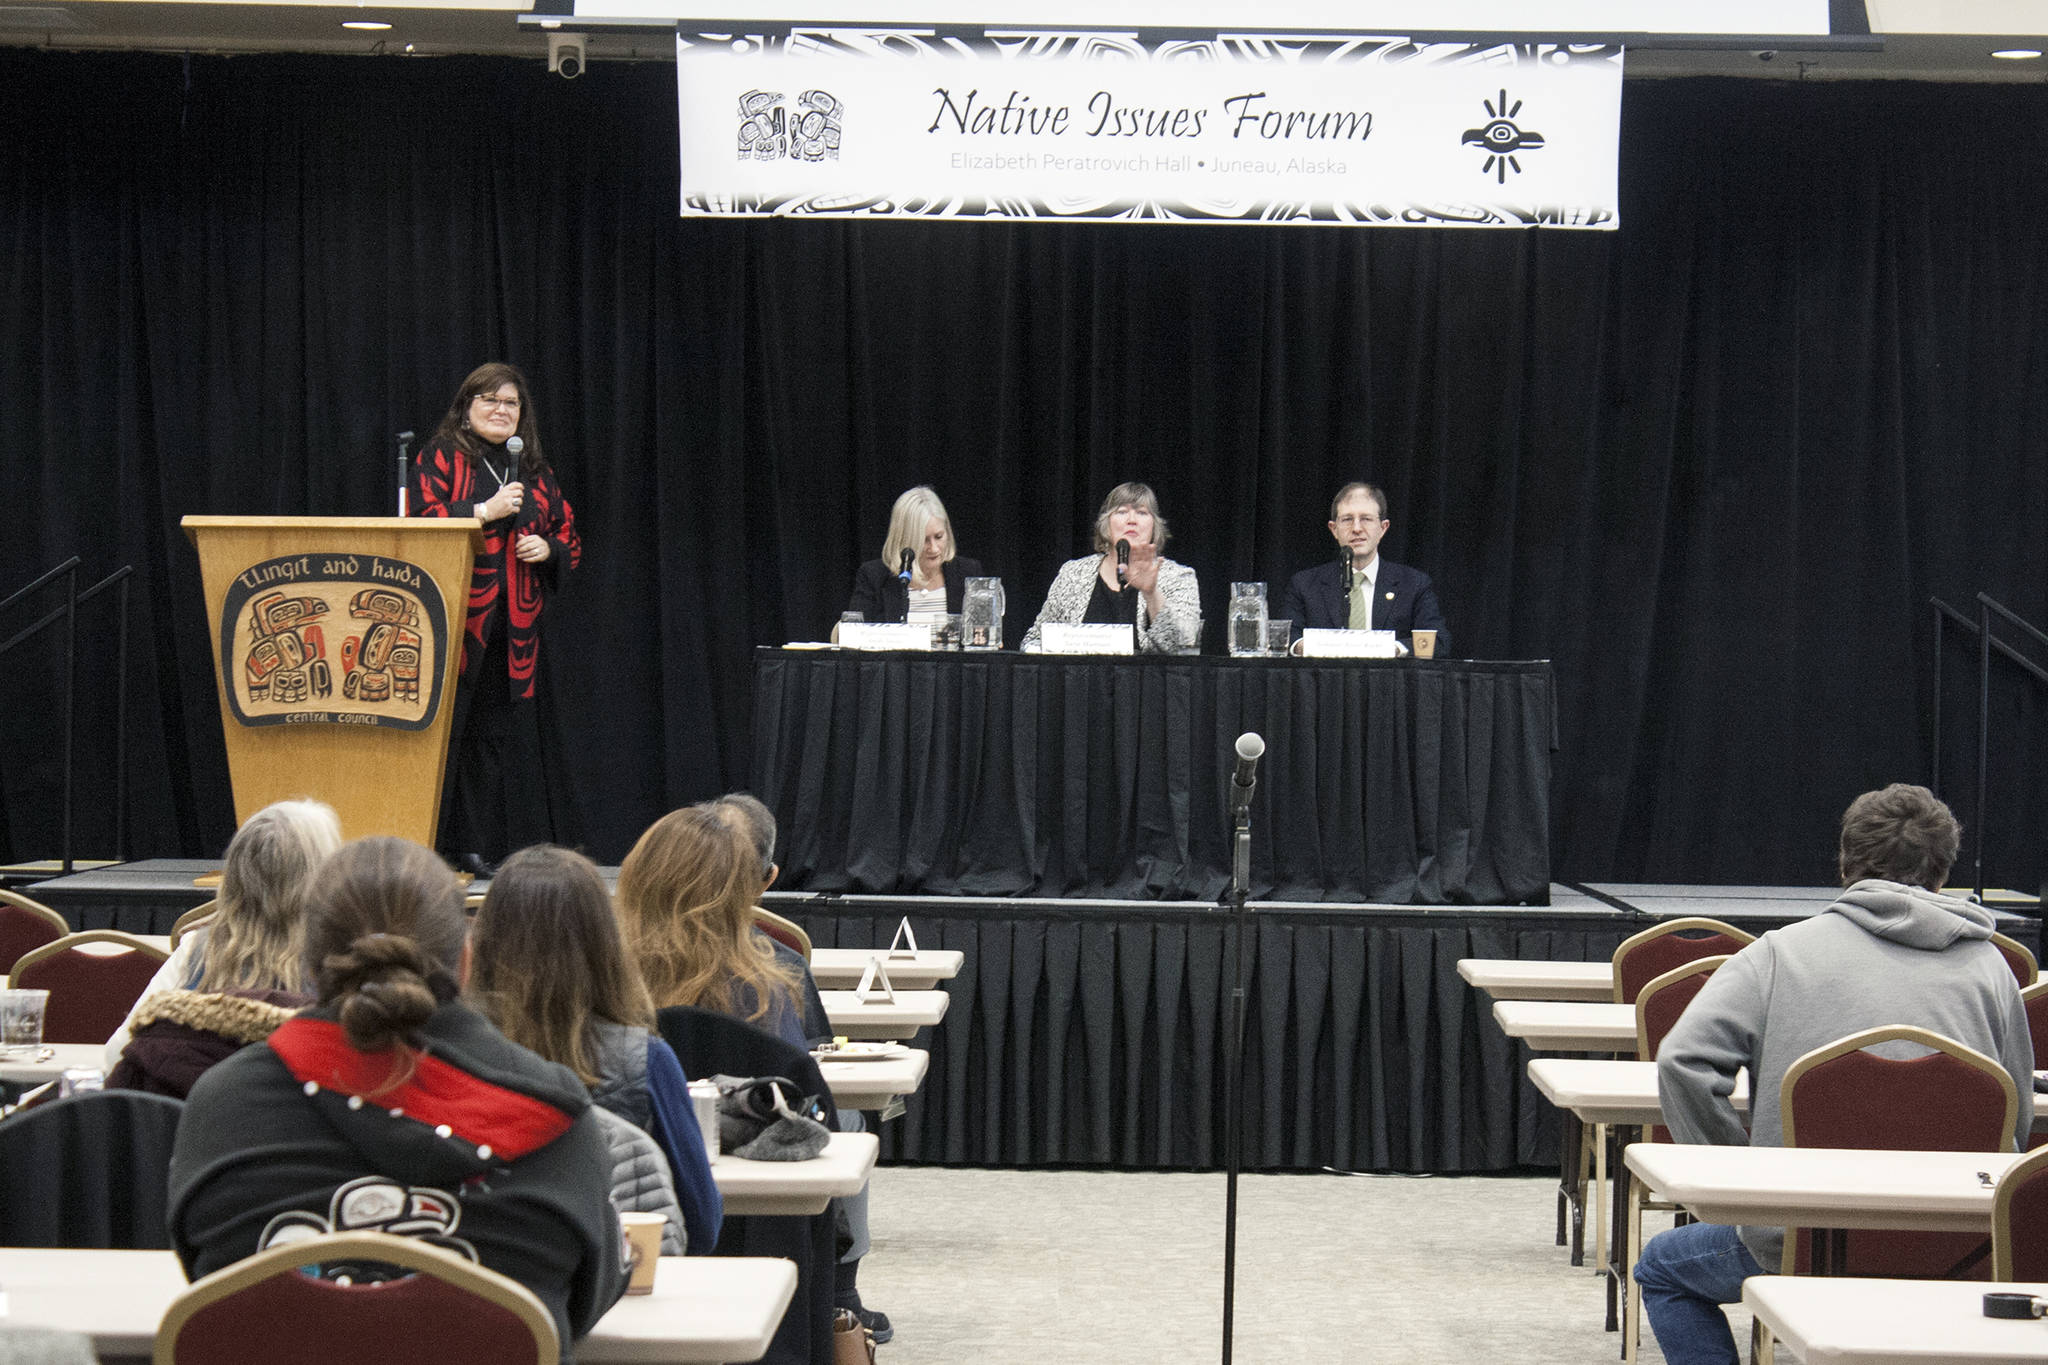 Central Council of Tlingit and Haida Indian Tribes of Alaska 2nd Vice President Jackie Pata introduces Reps. Andi Story and Sara Hannan and Sen. Jesse Kiehl a question during a Native Issues Forum Monday, Feb. 3, 2020, at Elizabeth Peratrovich Hall. (Ben Hohenstatt | Juneau Empire)